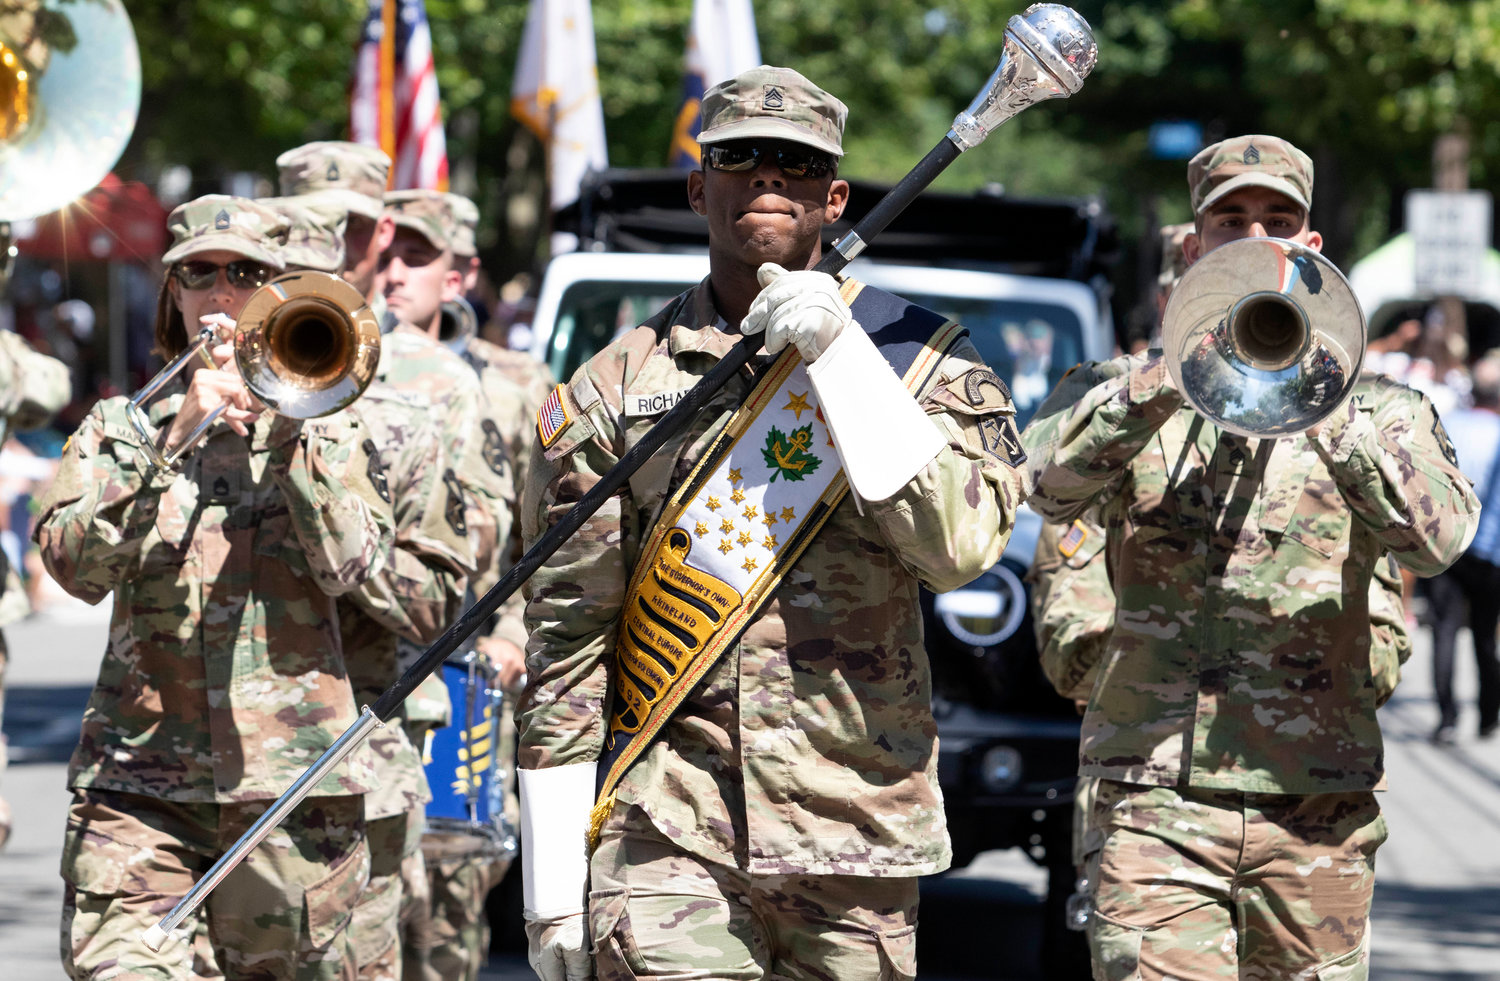 SSG John Richards (center) of Governor's Own 88th Army Band leads the band down Hope Street.